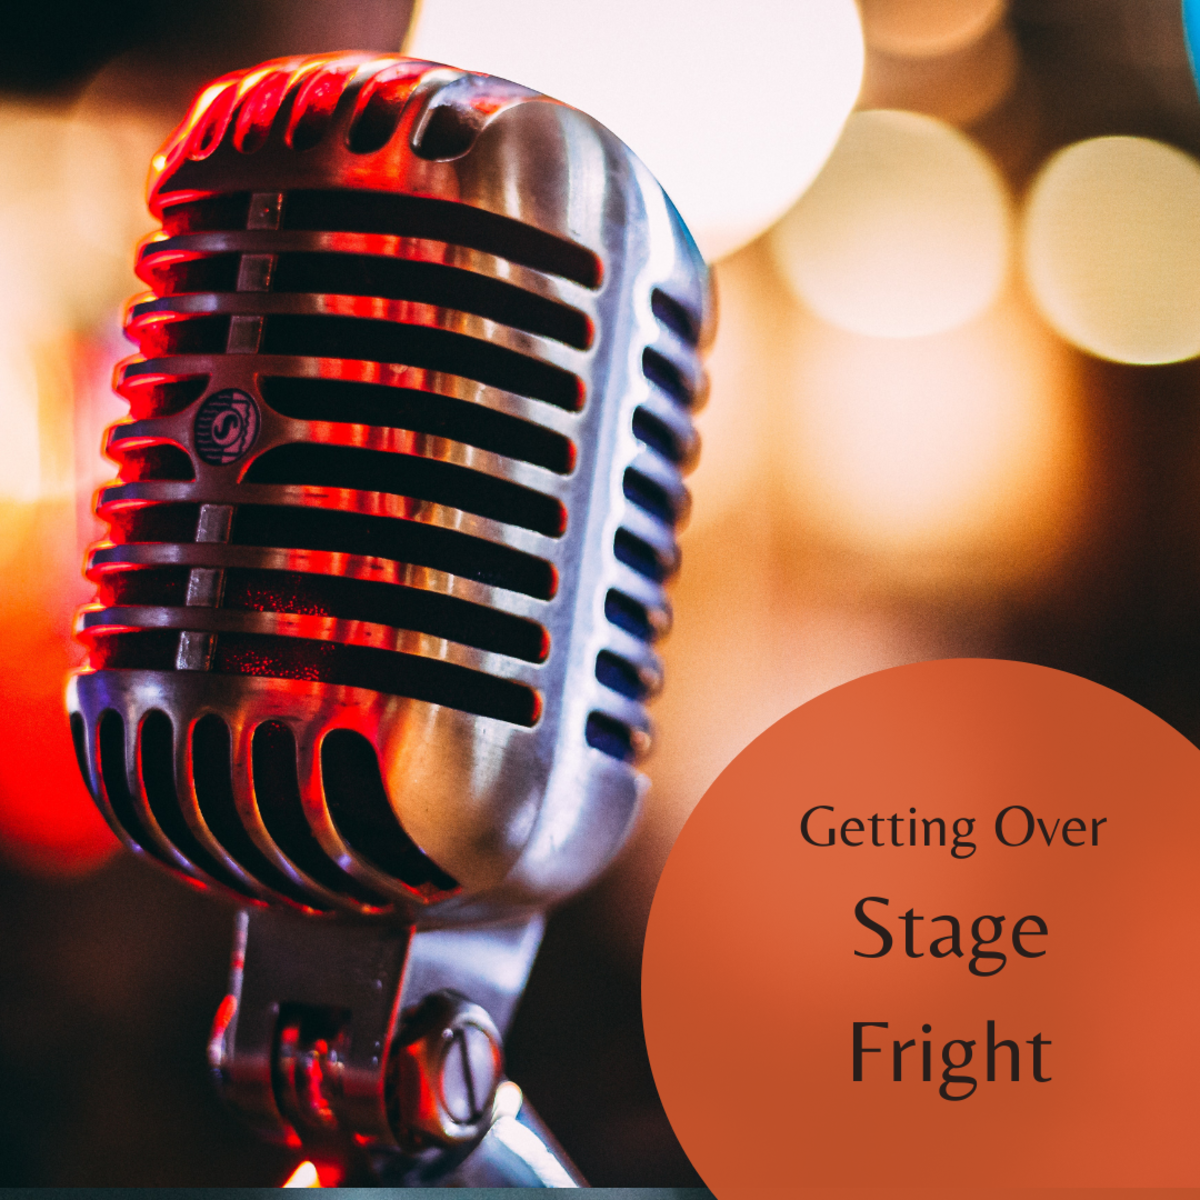 How to Handle Criticism and Avoid Stage Fright as a Guitar Player